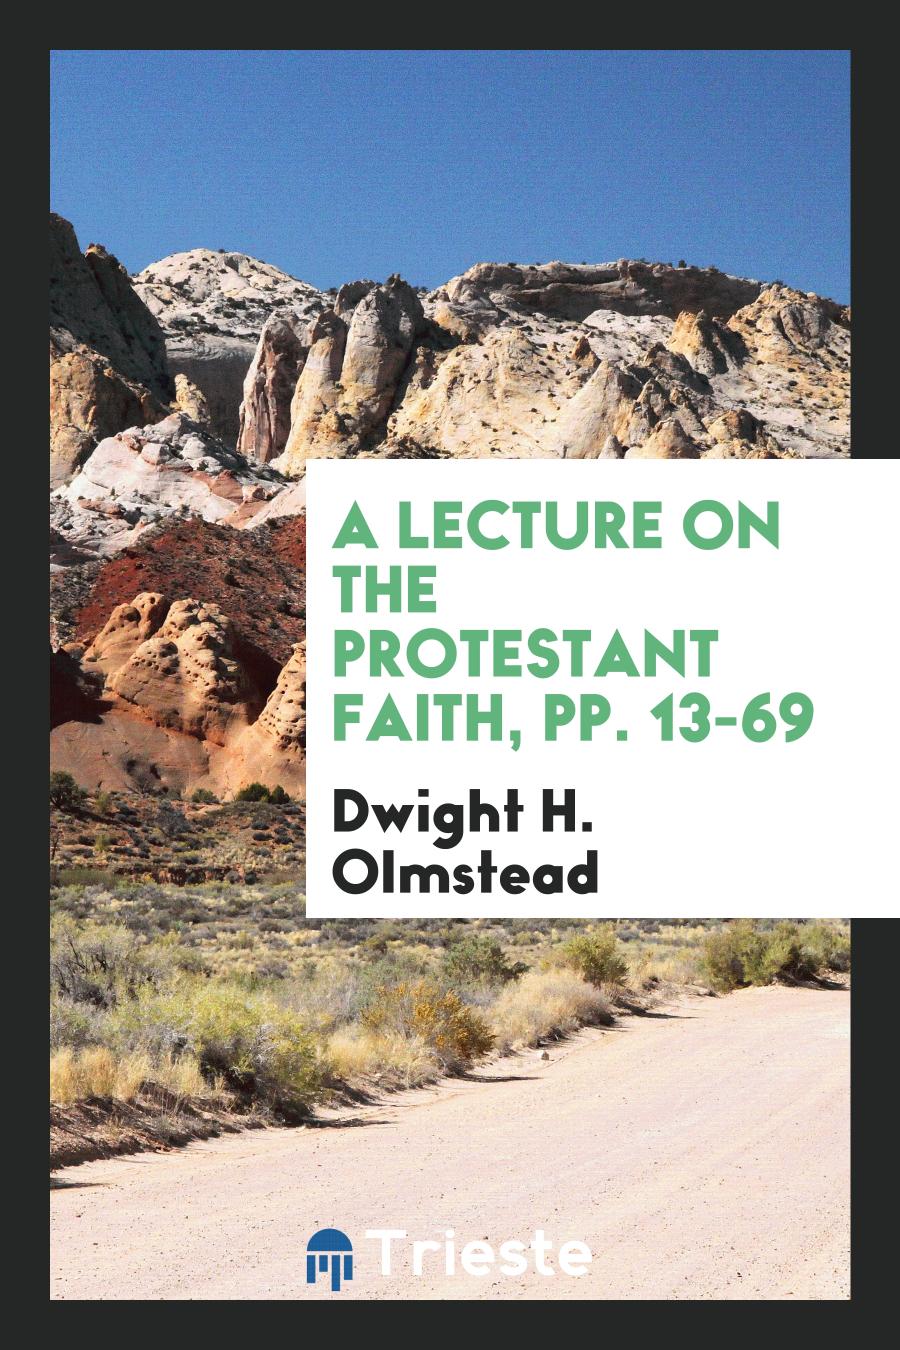 A Lecture on the Protestant Faith, pp. 13-69